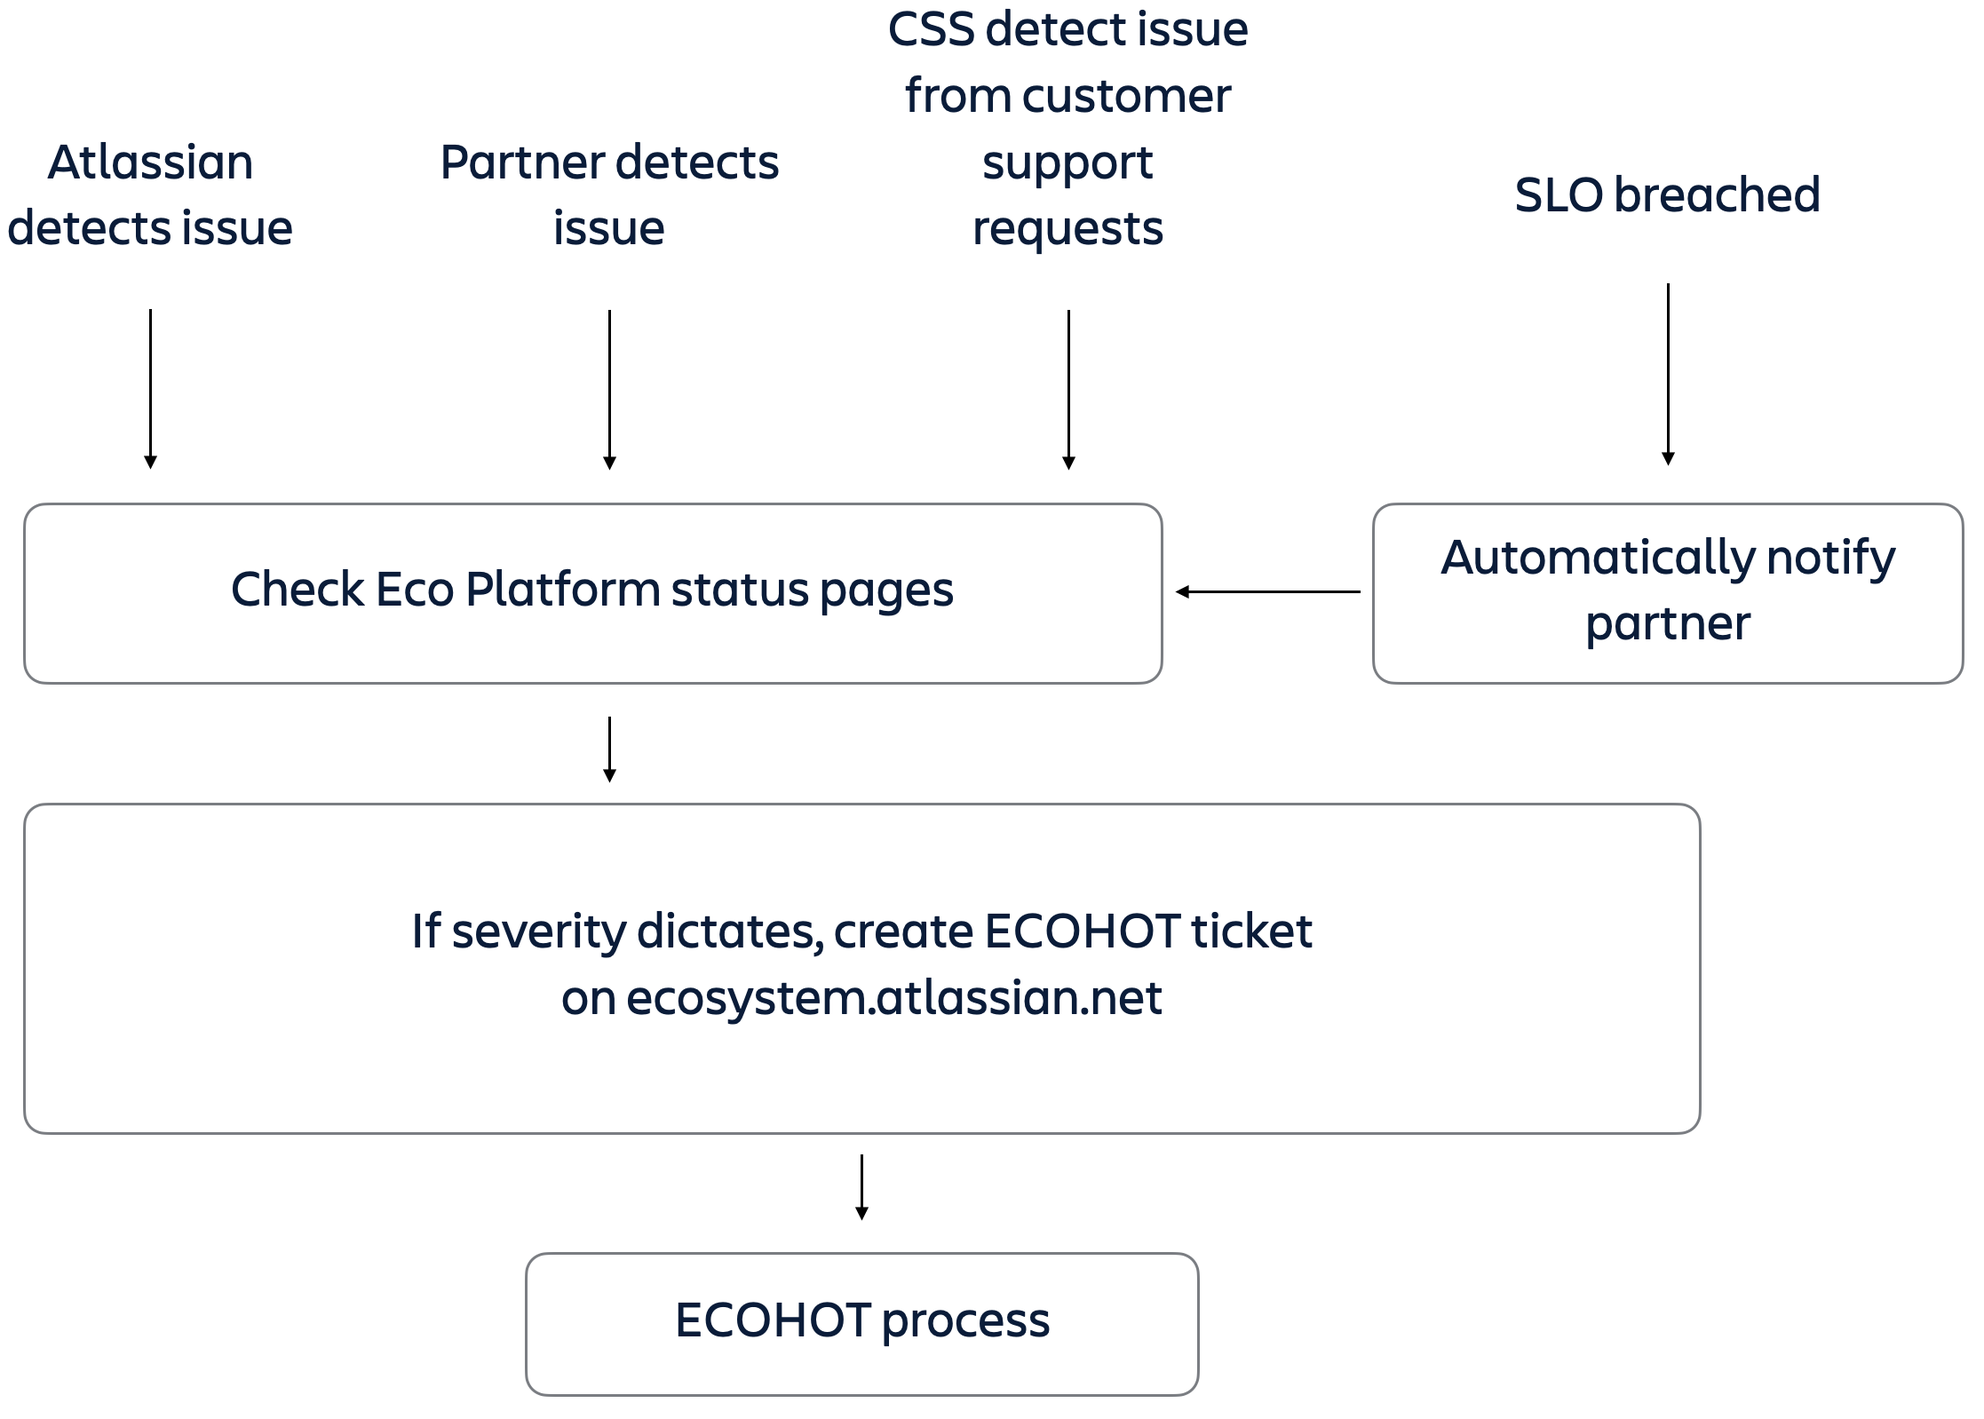 Sourses of ECOHOT tickets